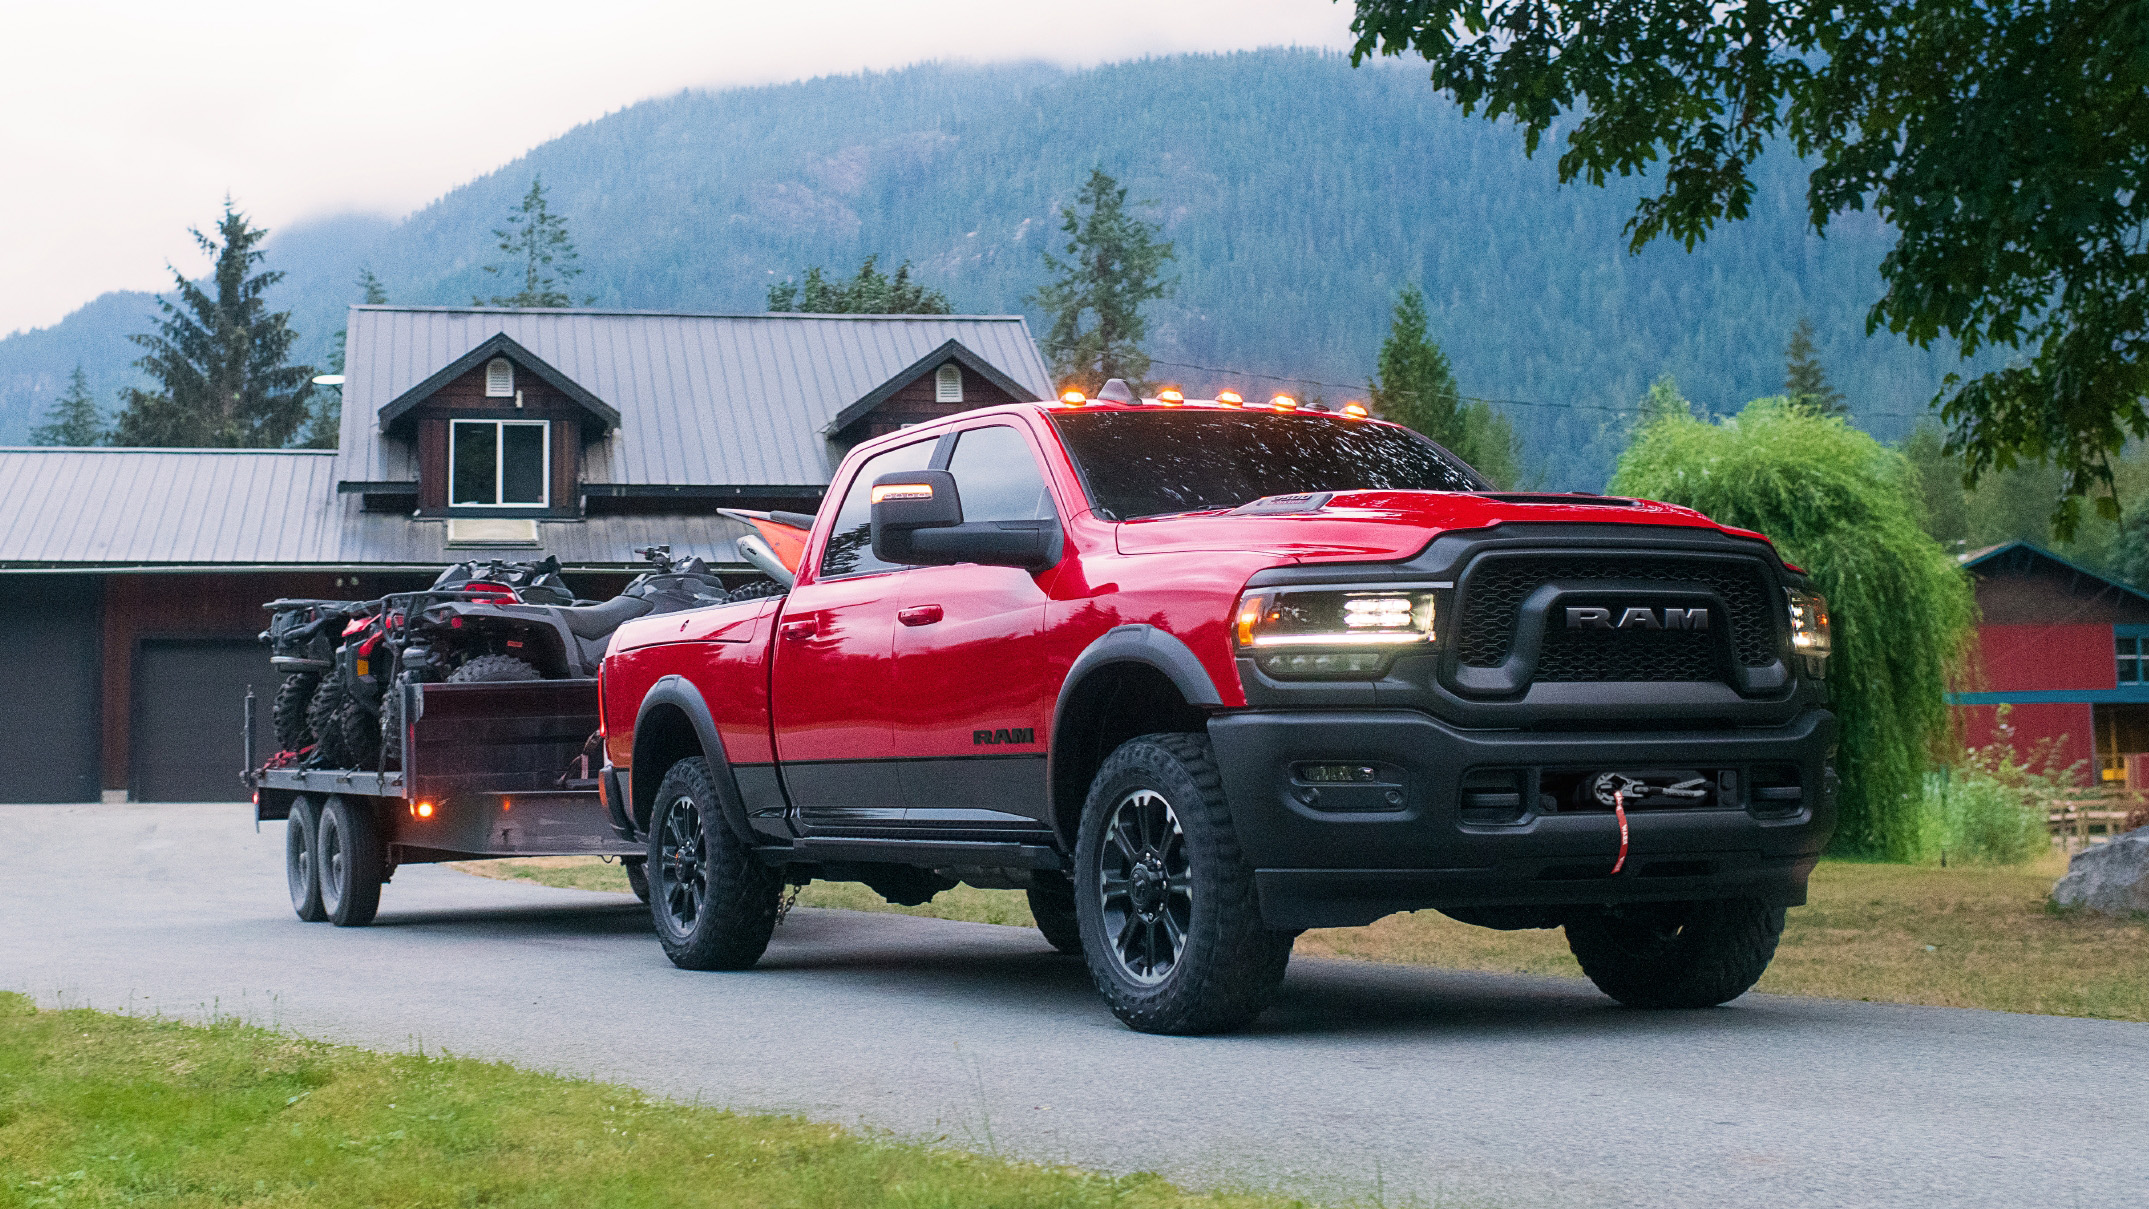 2023 Ram Rebel 2500 HD adds the diesel engine you can't have in the